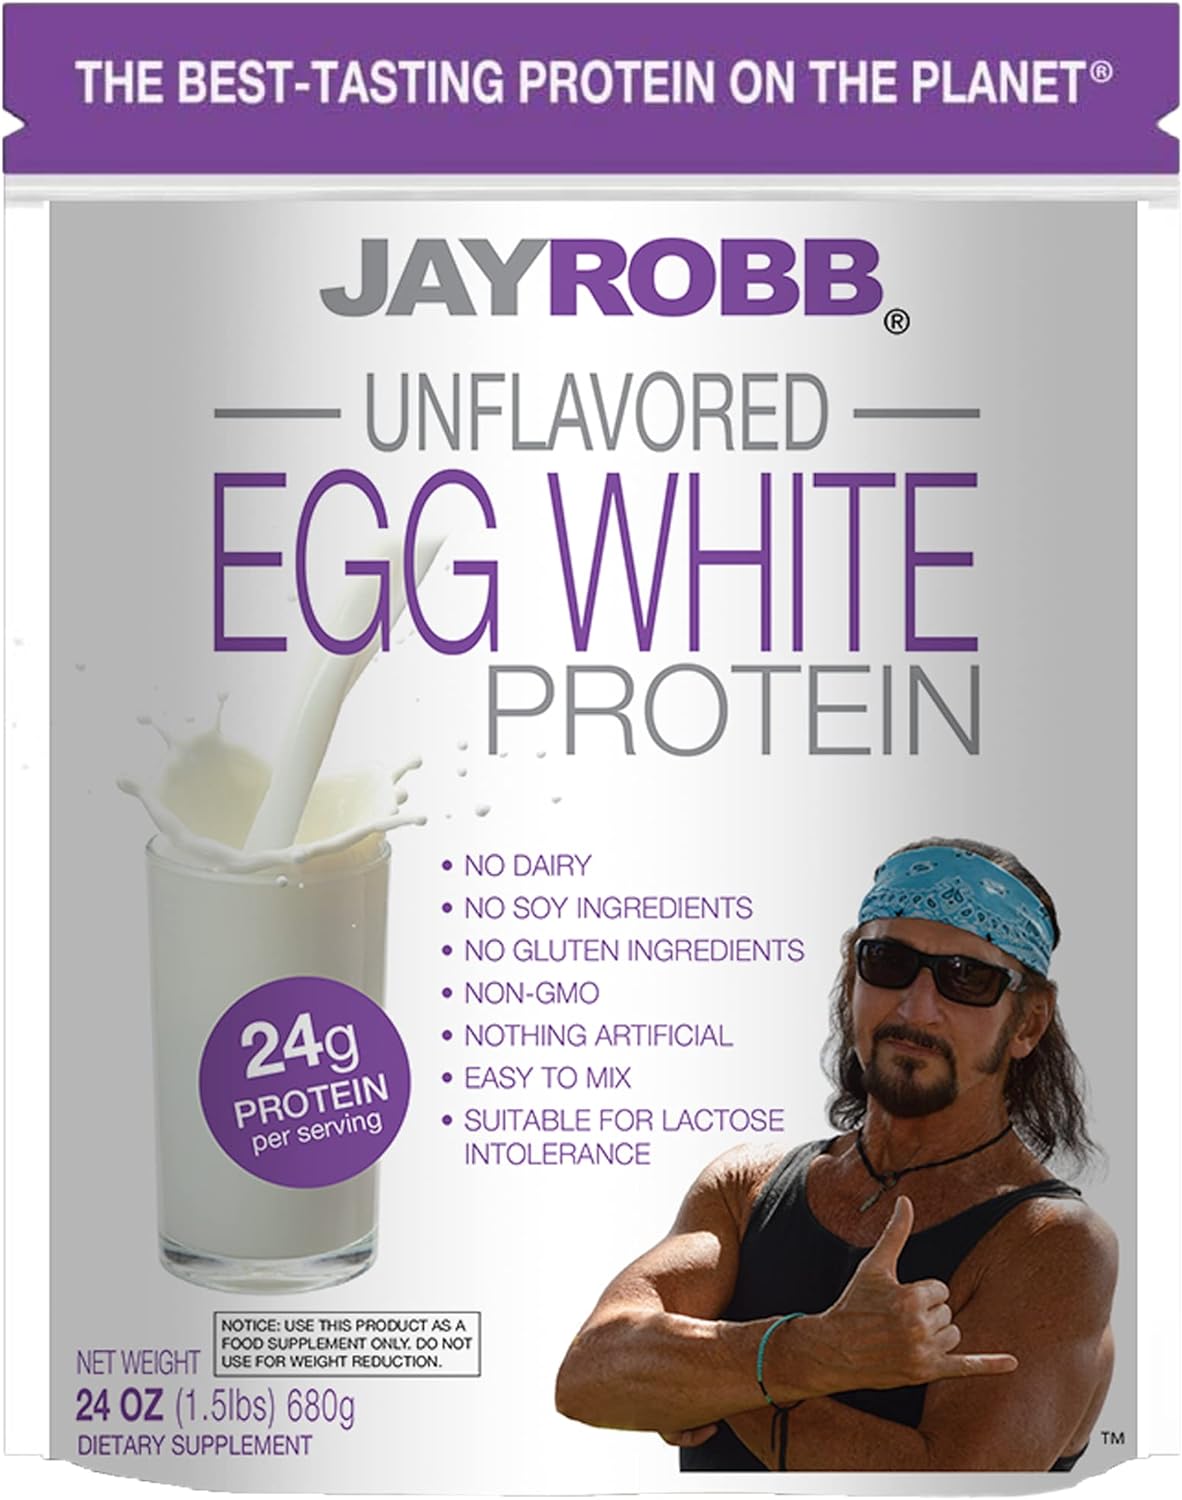 Jay Robb Unflavored Egg White Protein Powder, Low Carb, Keto, Vegetarian, Gluten Free, Lactose Free, No Sugar Added, No Fat, No Soy, Nothing Artificial, Non-GMO, Best-Tasting (24 oz, Unflavored)